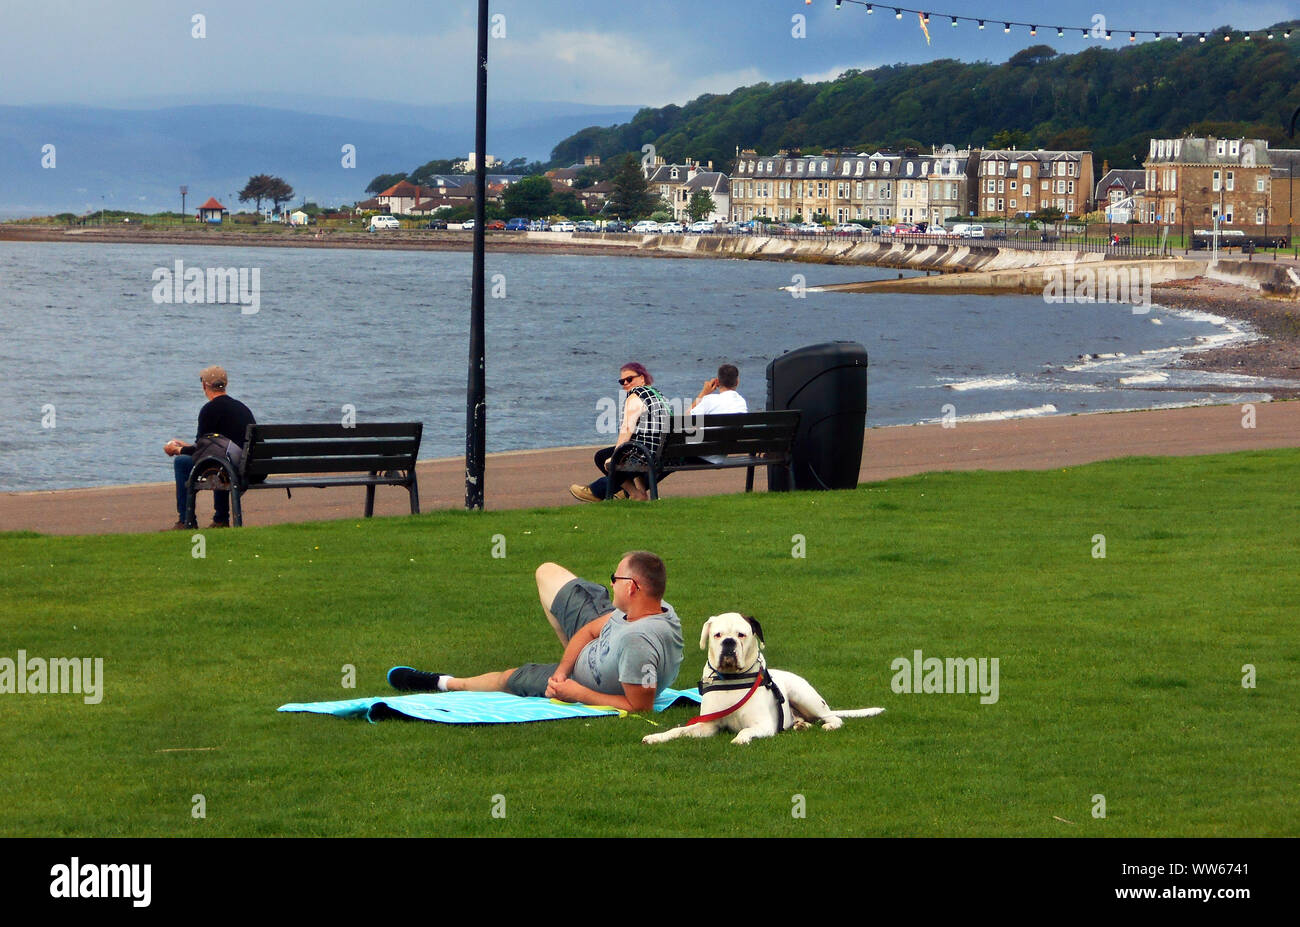 A few people sitting and relaxing at the sea front, holiday town, of Largs on the Firth of Clyde in Scotland. There is a man lying on the grass with a rather large black and white dog keeping its eye on things! Alan Wylie/ALAMY © Stock Photo